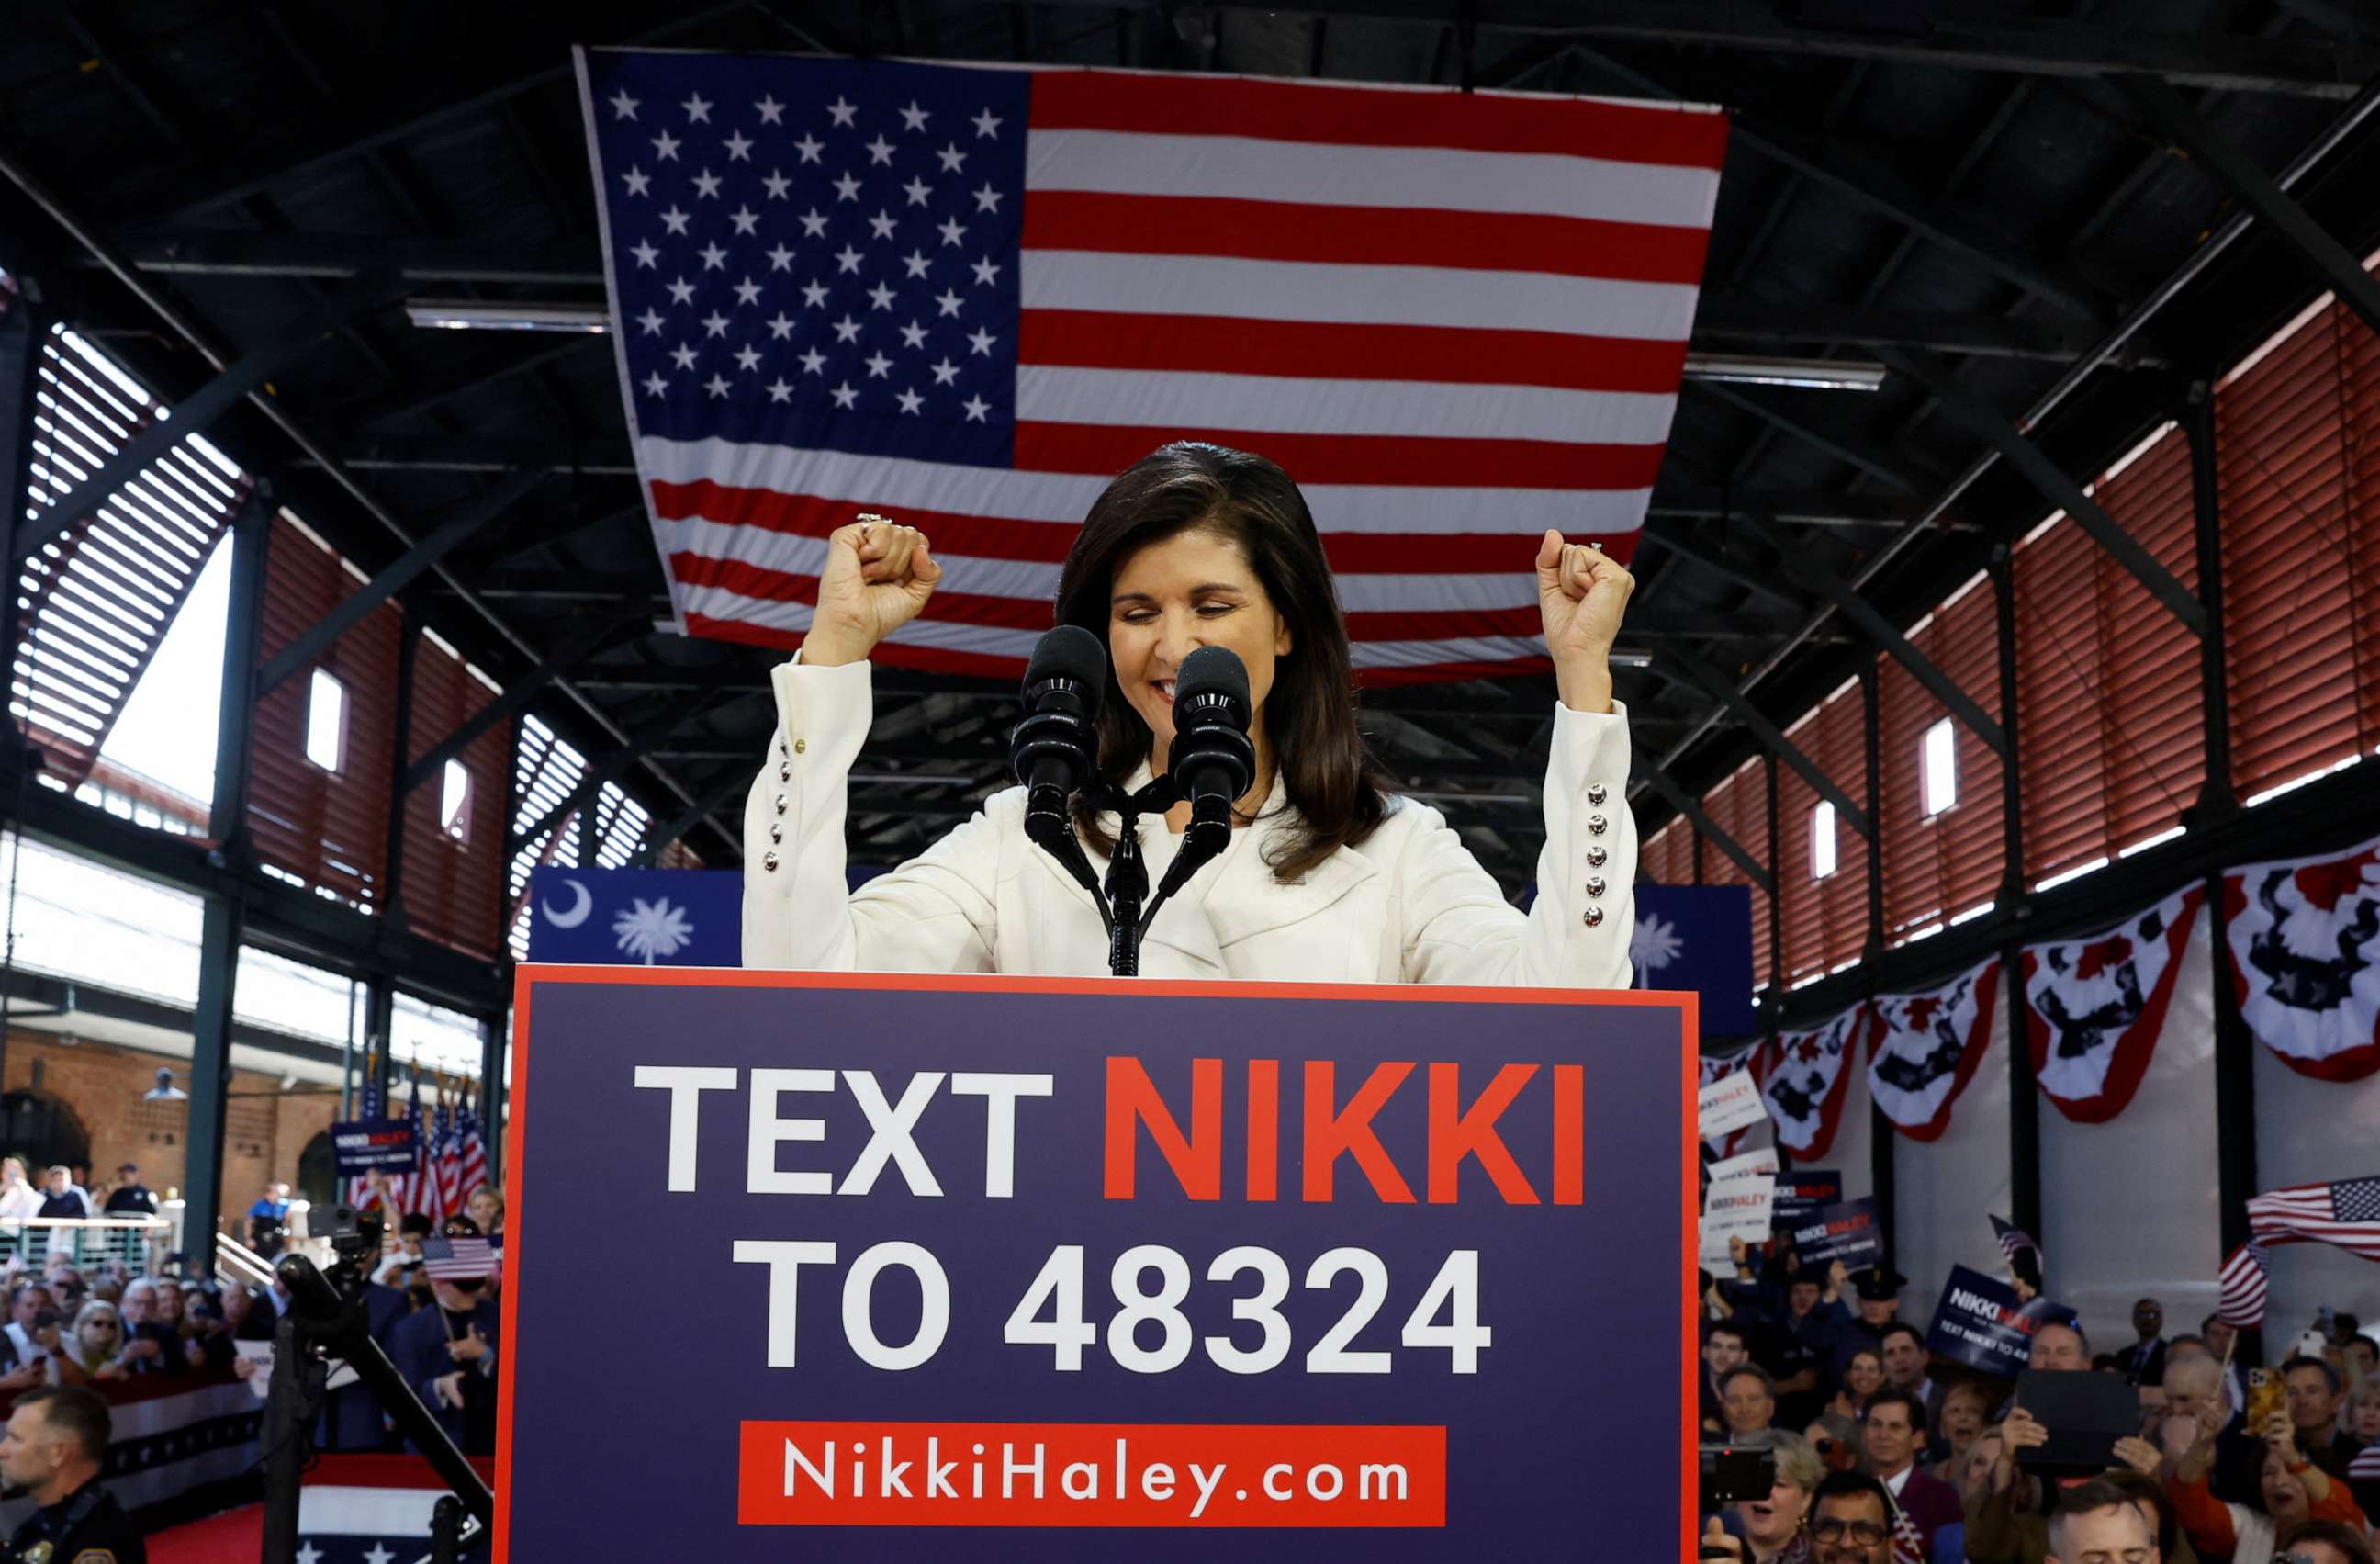 PHOTO: Former U.S. ambassador to the United Nations Nikki Haley announces her run for the 2024 Republican presidential nomination at a campaign event in Charleston, South Carolina, Feb. 15, 2023.